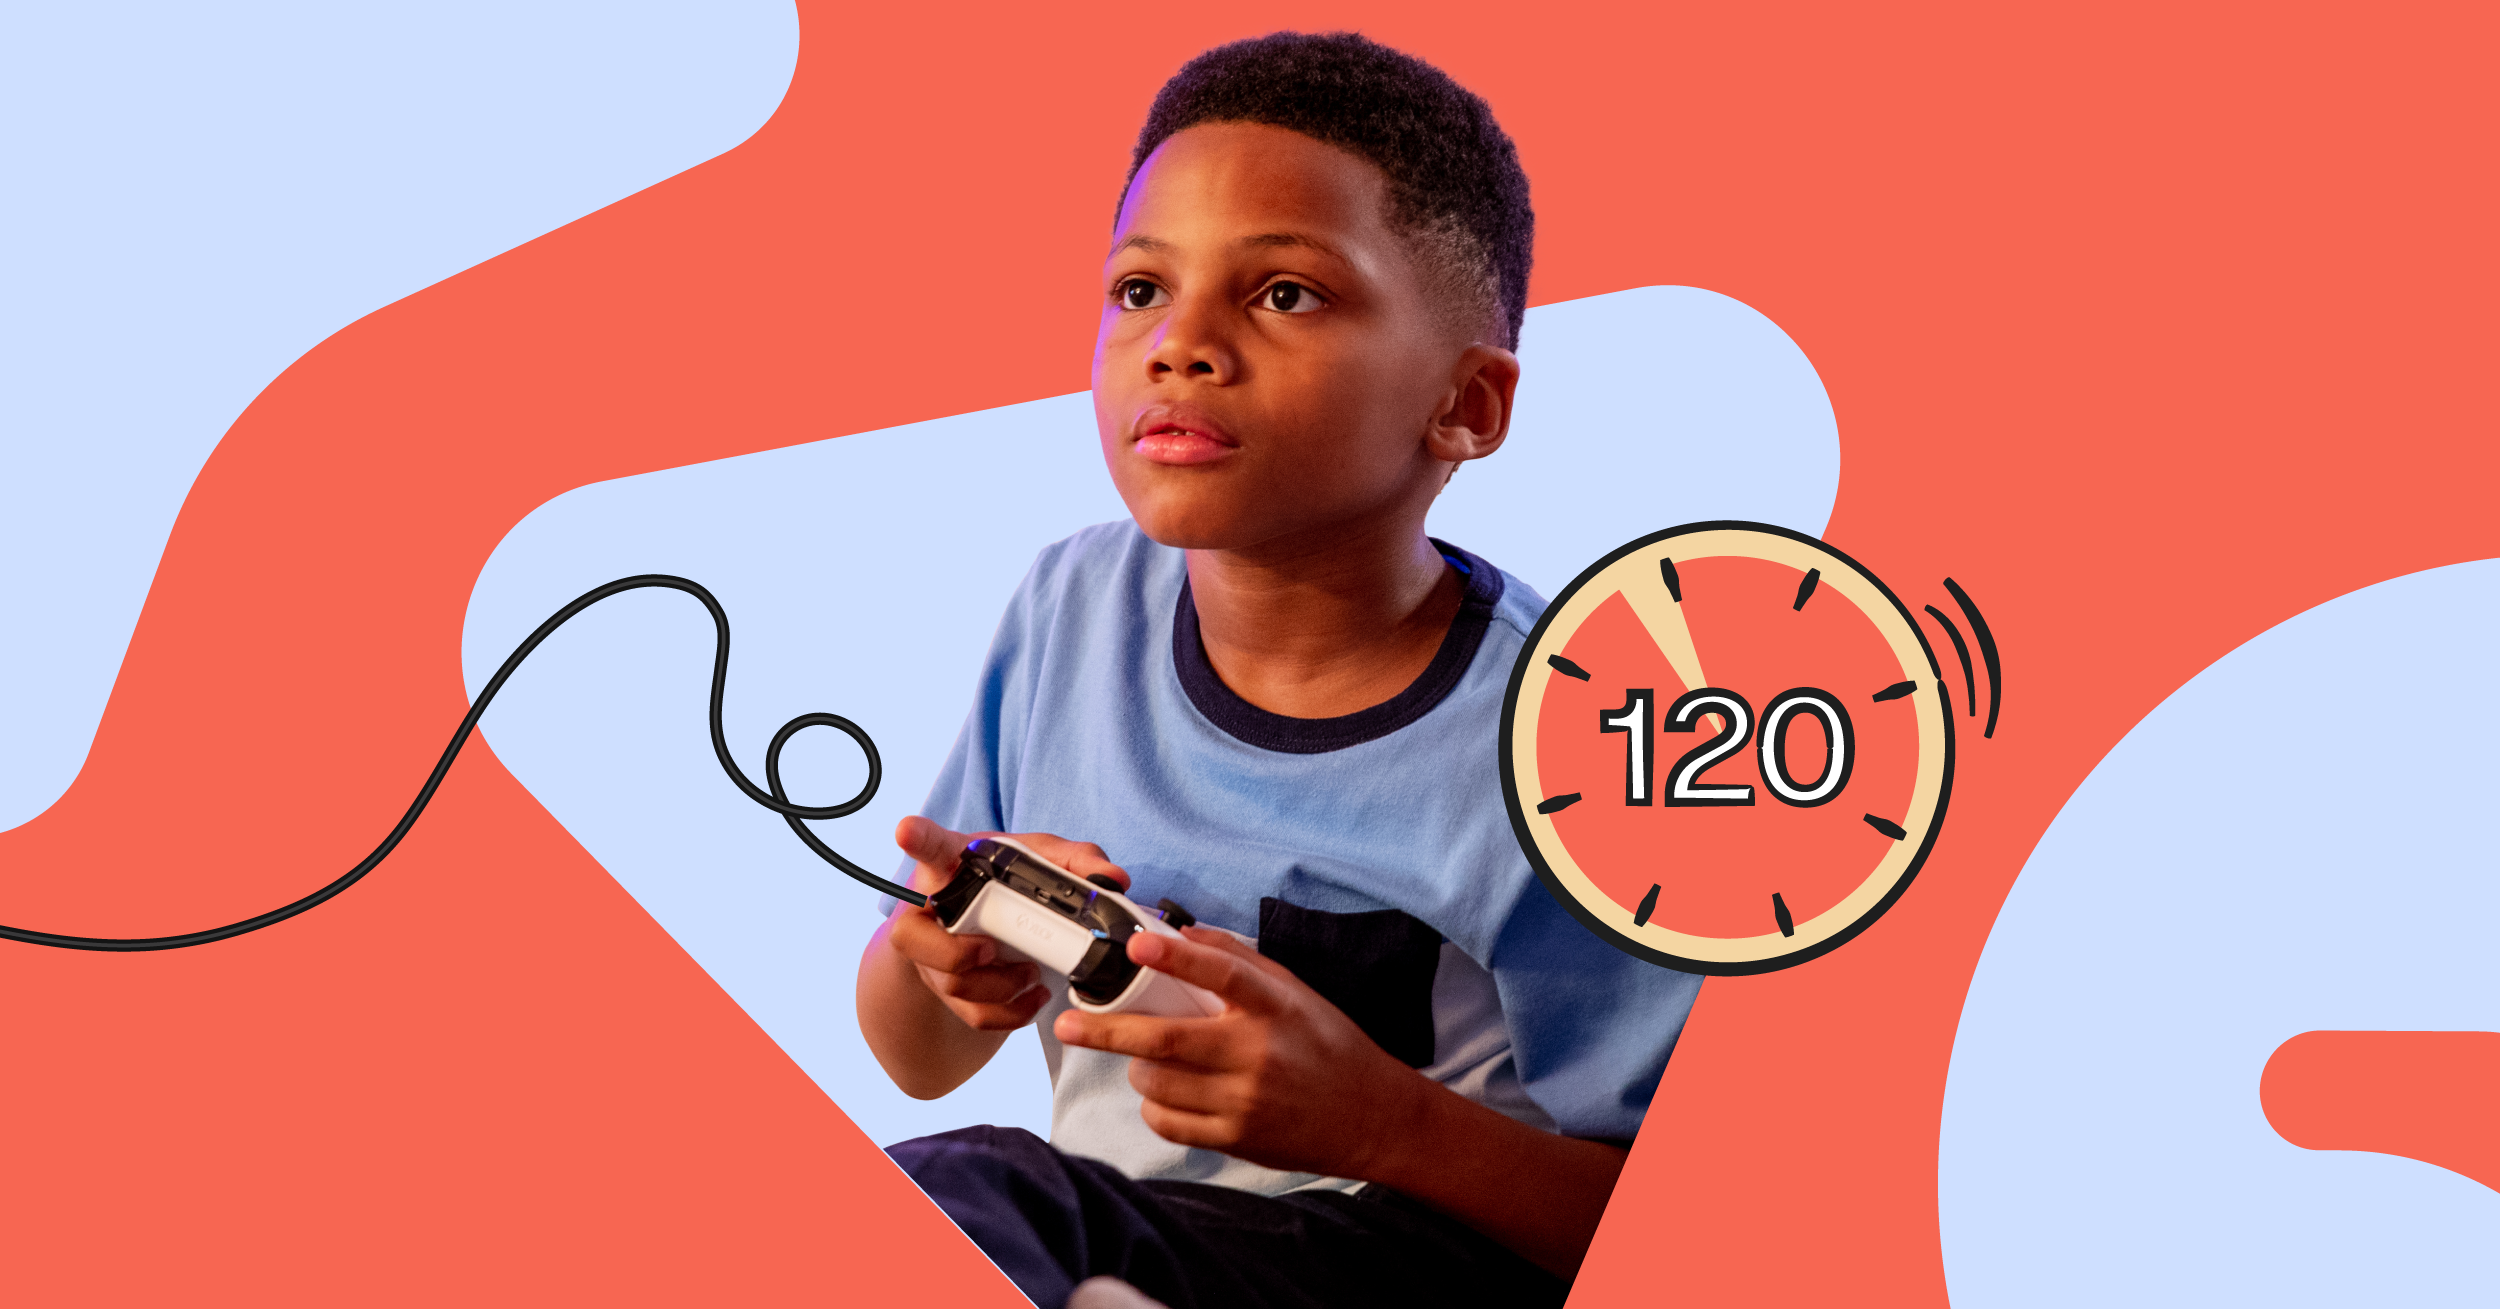 Get Your Kids Hooked on Learning with Free Computer Games